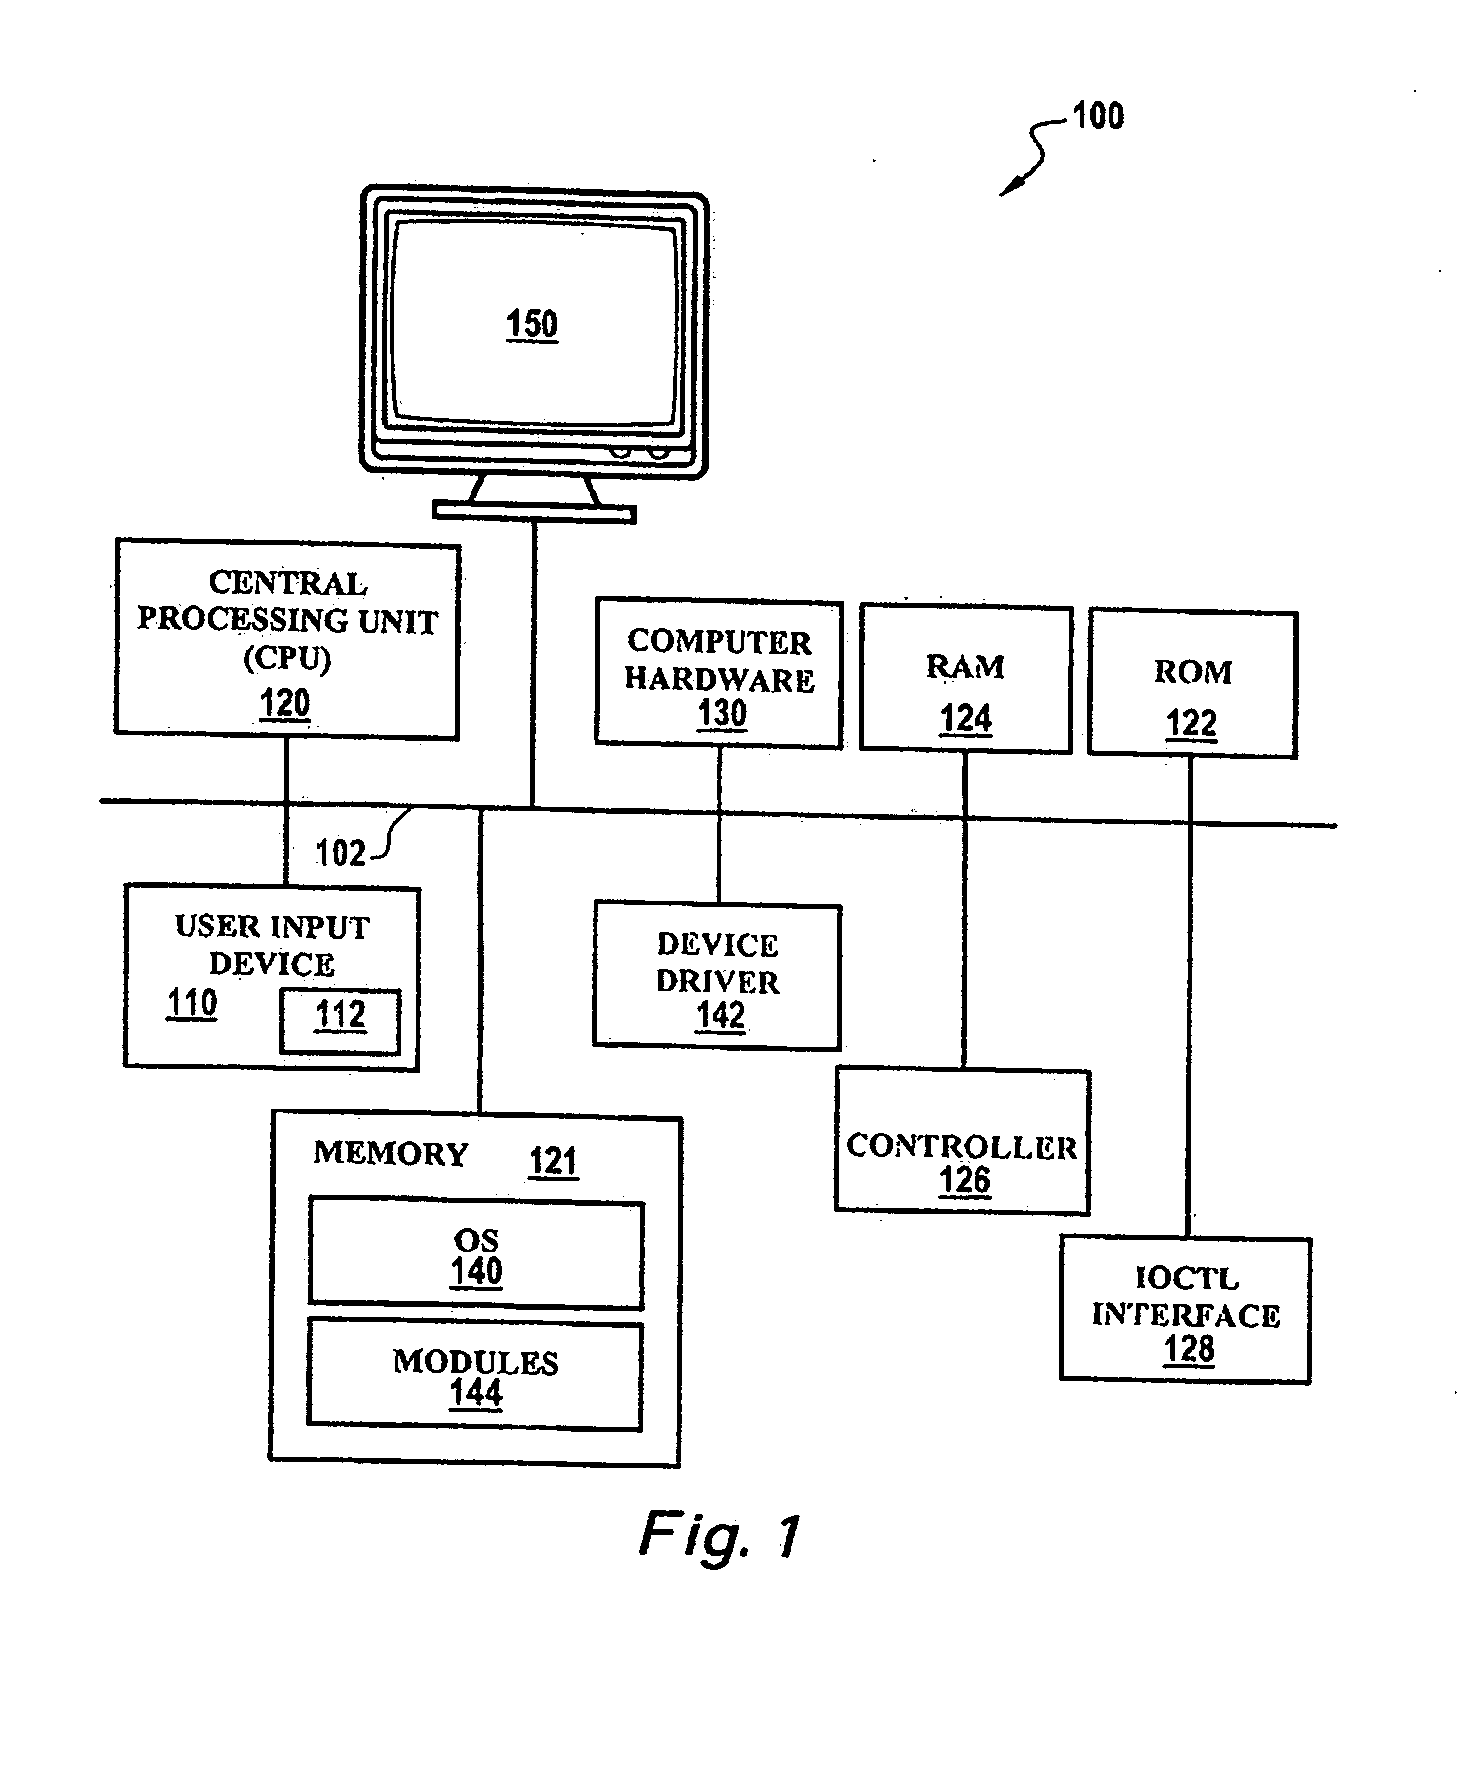 Application programming interface for fusion message passaging technology